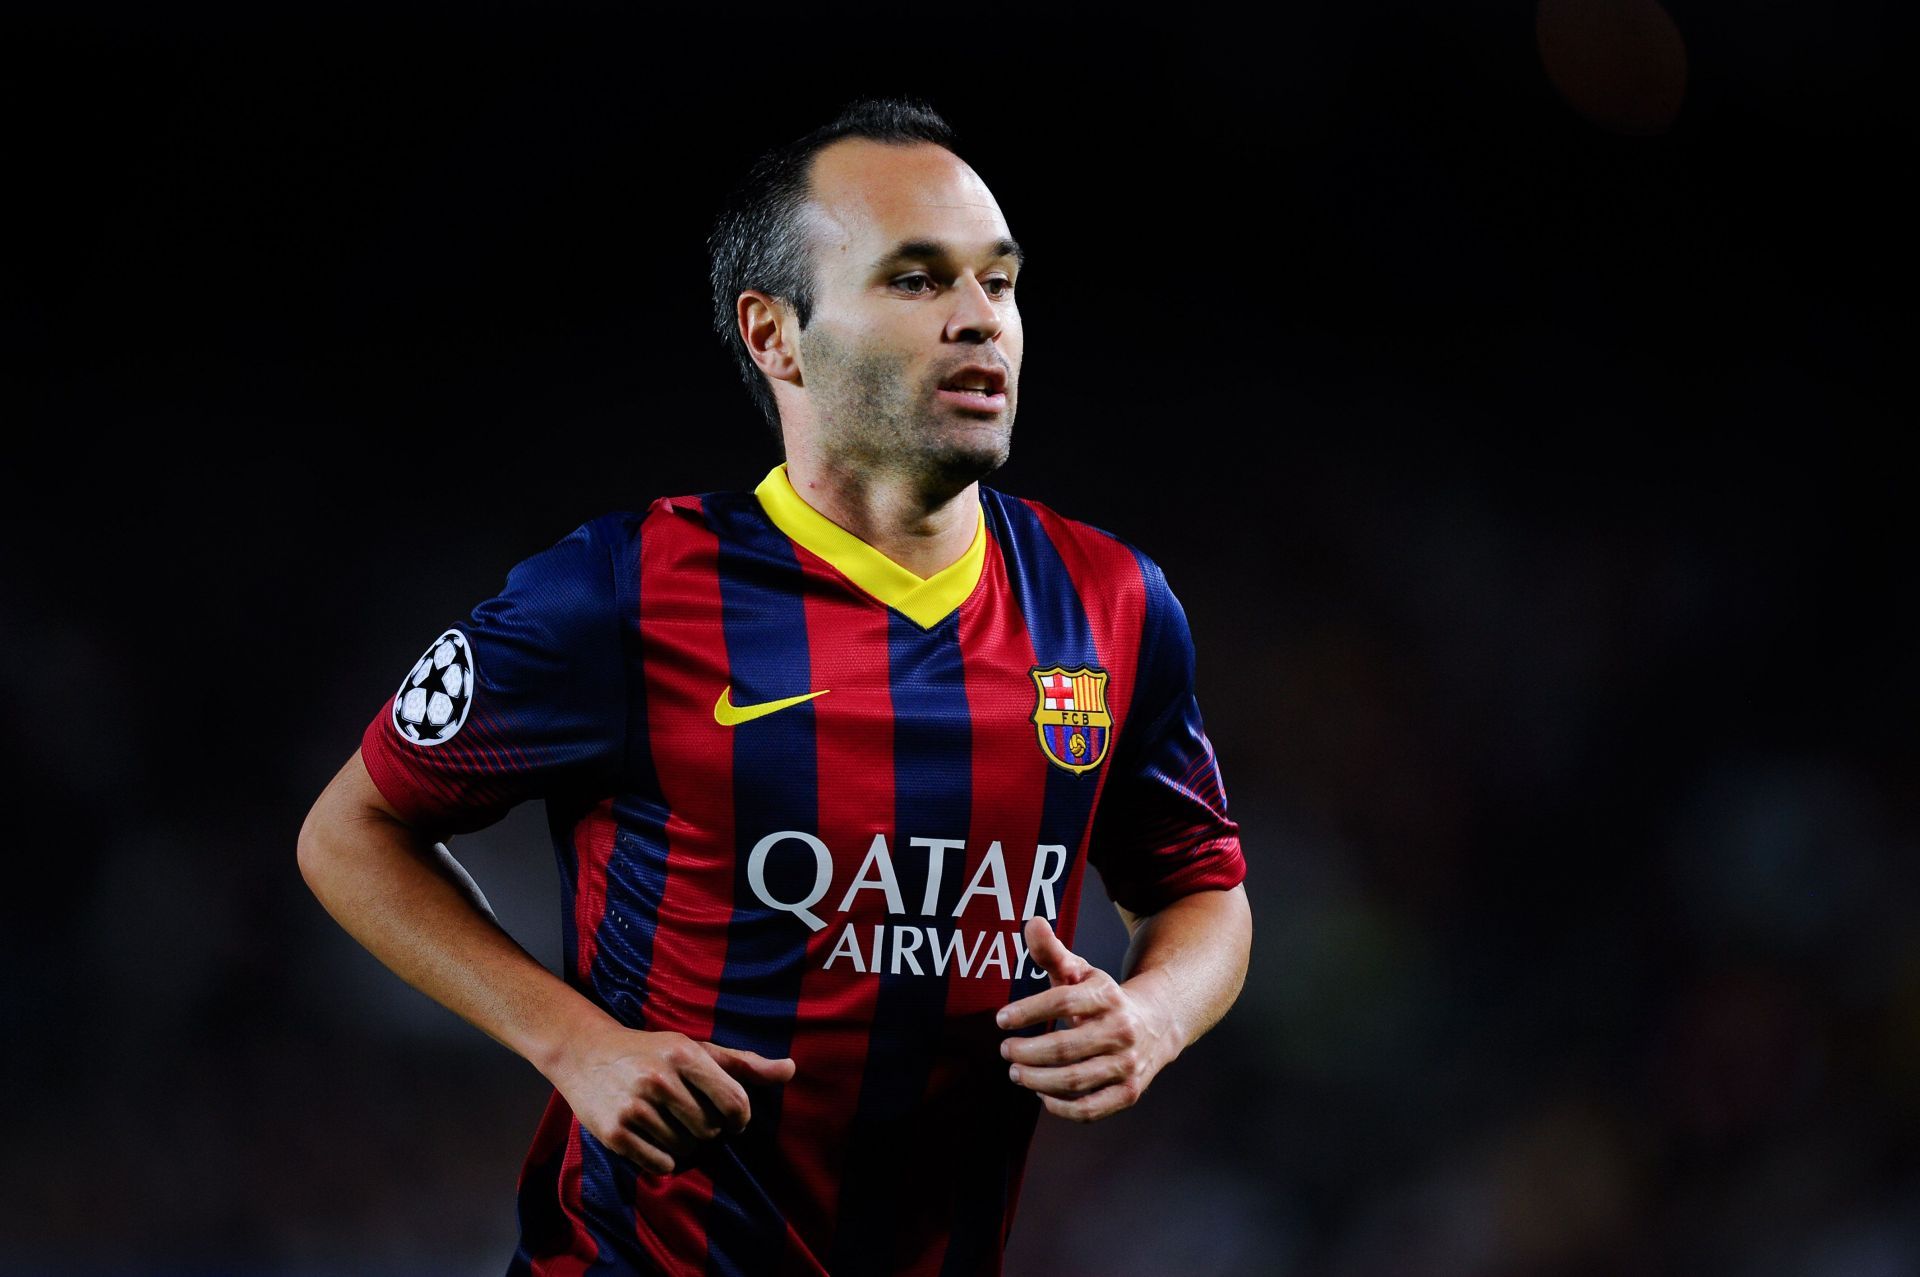 Andres Iniesta is one of the greatest players to wear a Barcelona jersey.